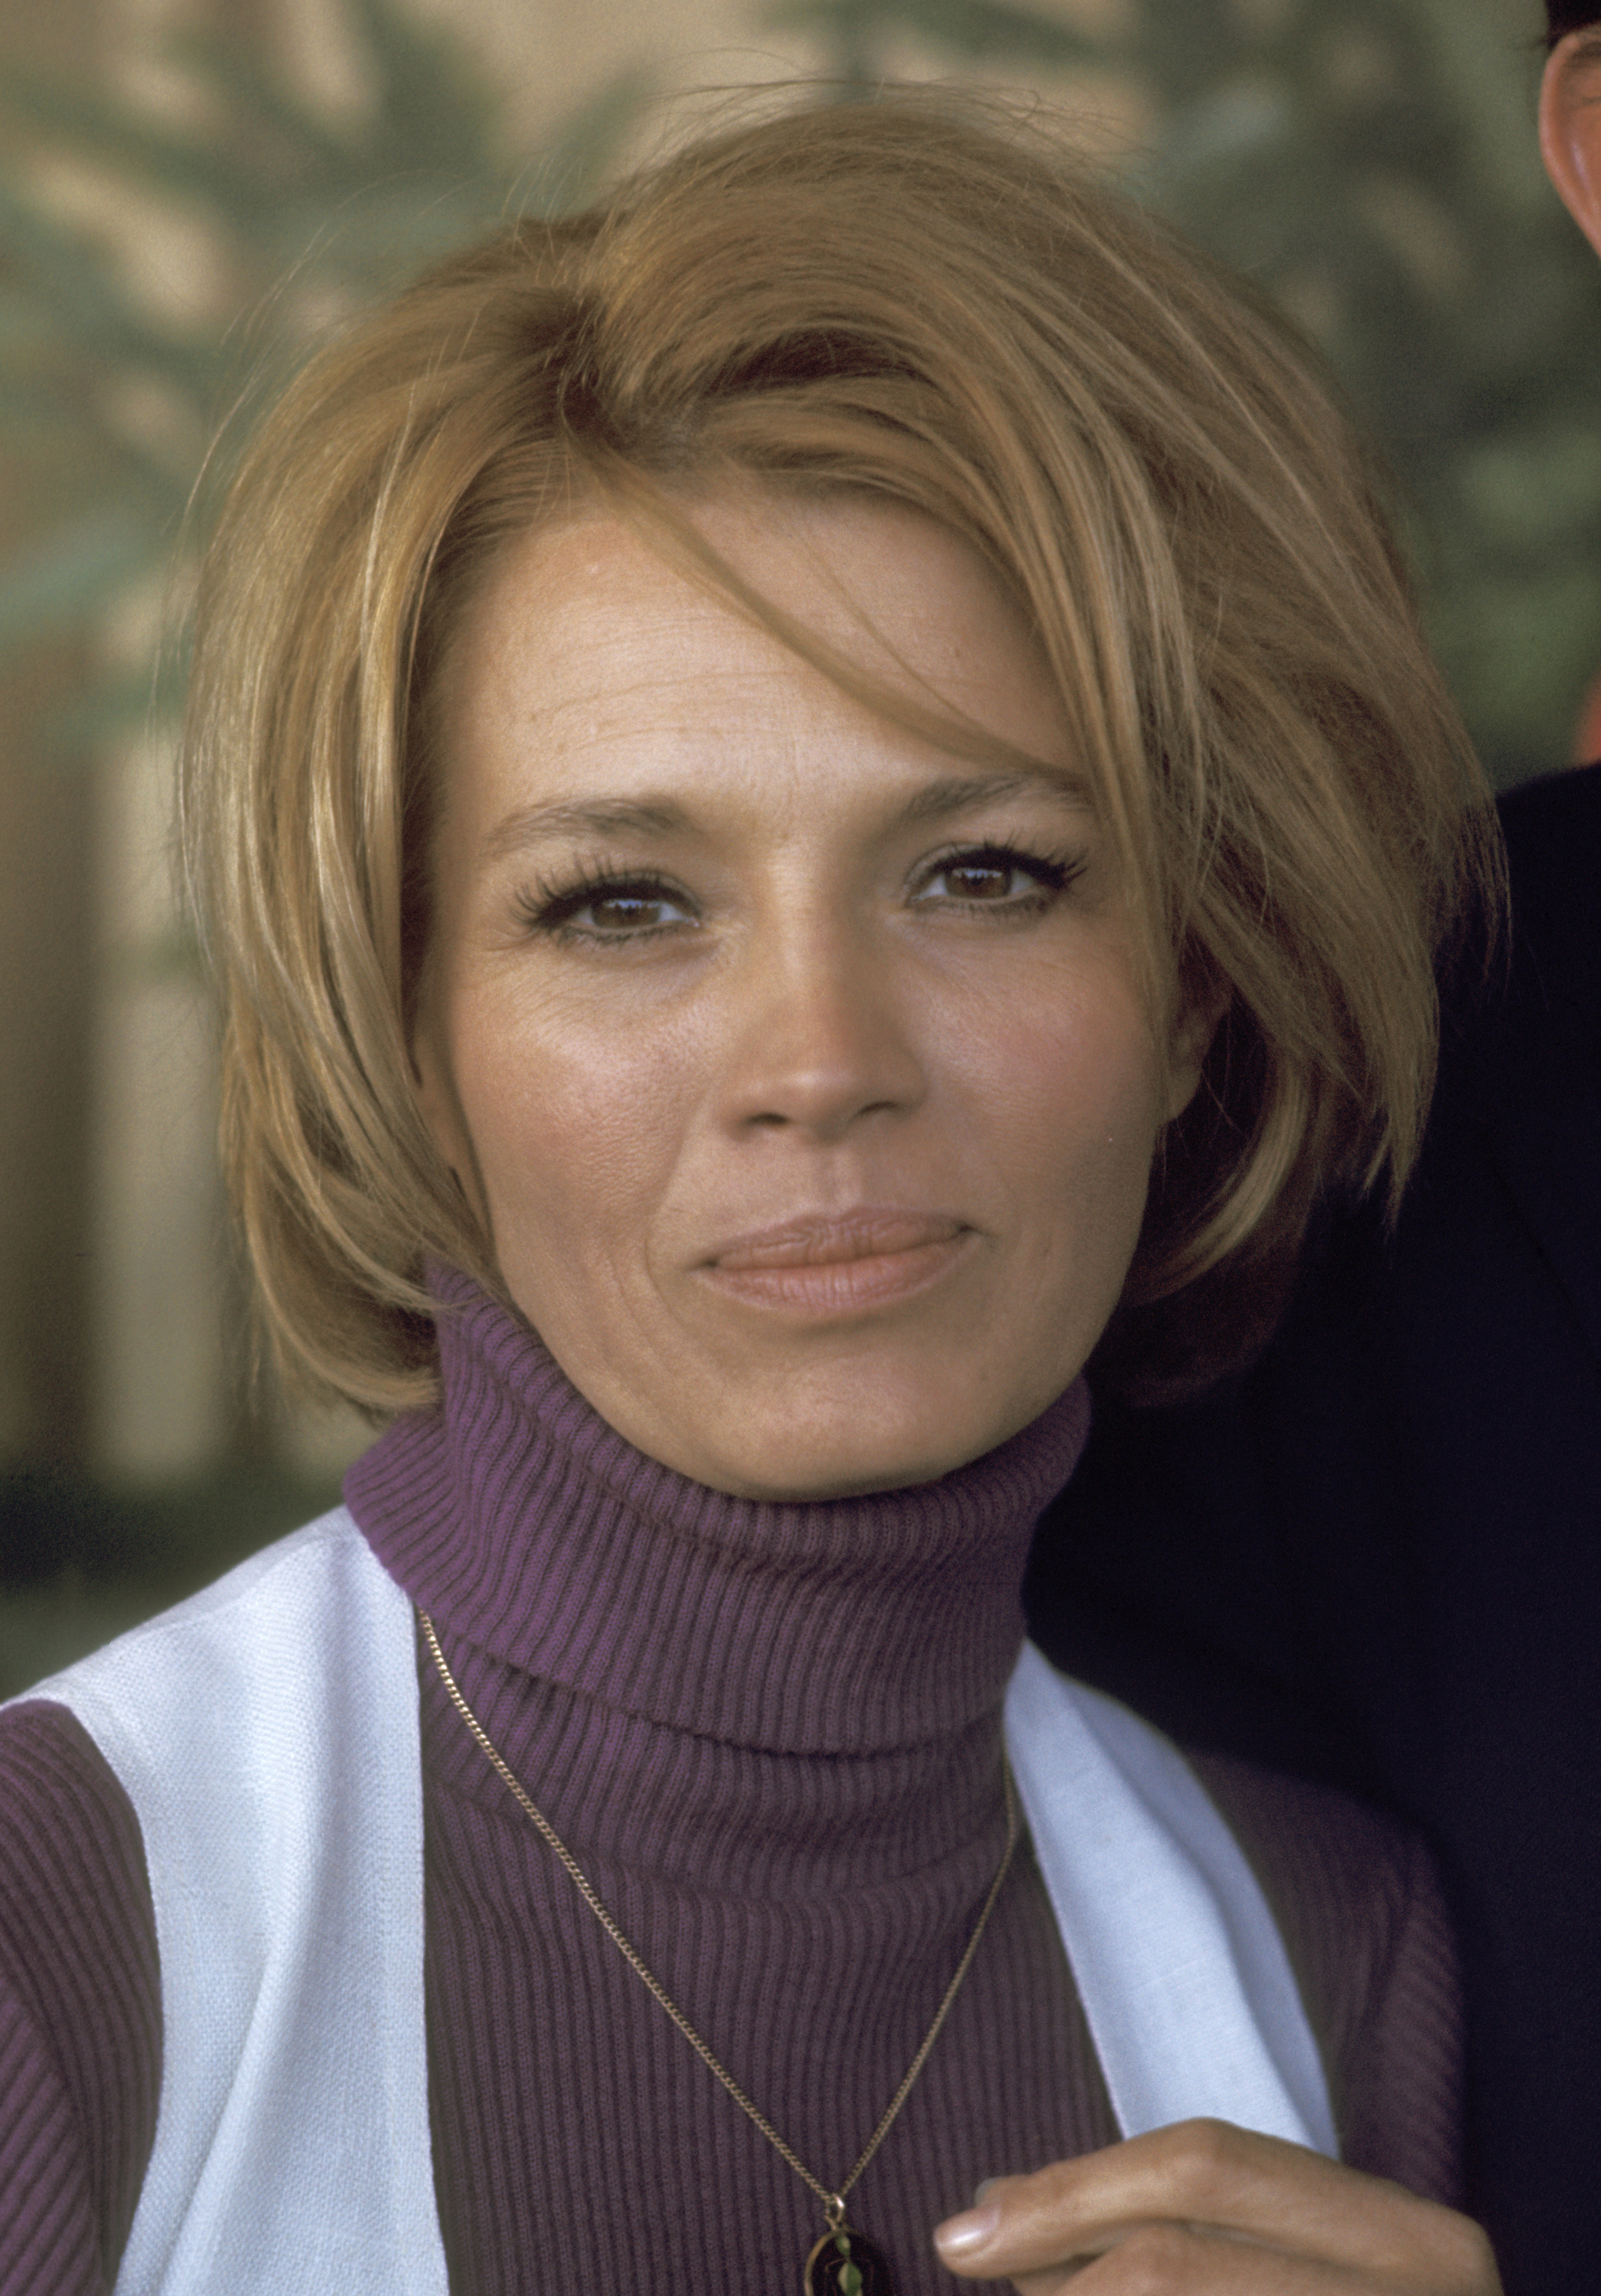 Actress Angie Dickinson during National Leisure Inc. Benefit at Lion Country Safari on April 24, 1971 in Laguana Hills, California | Source: Getty Images